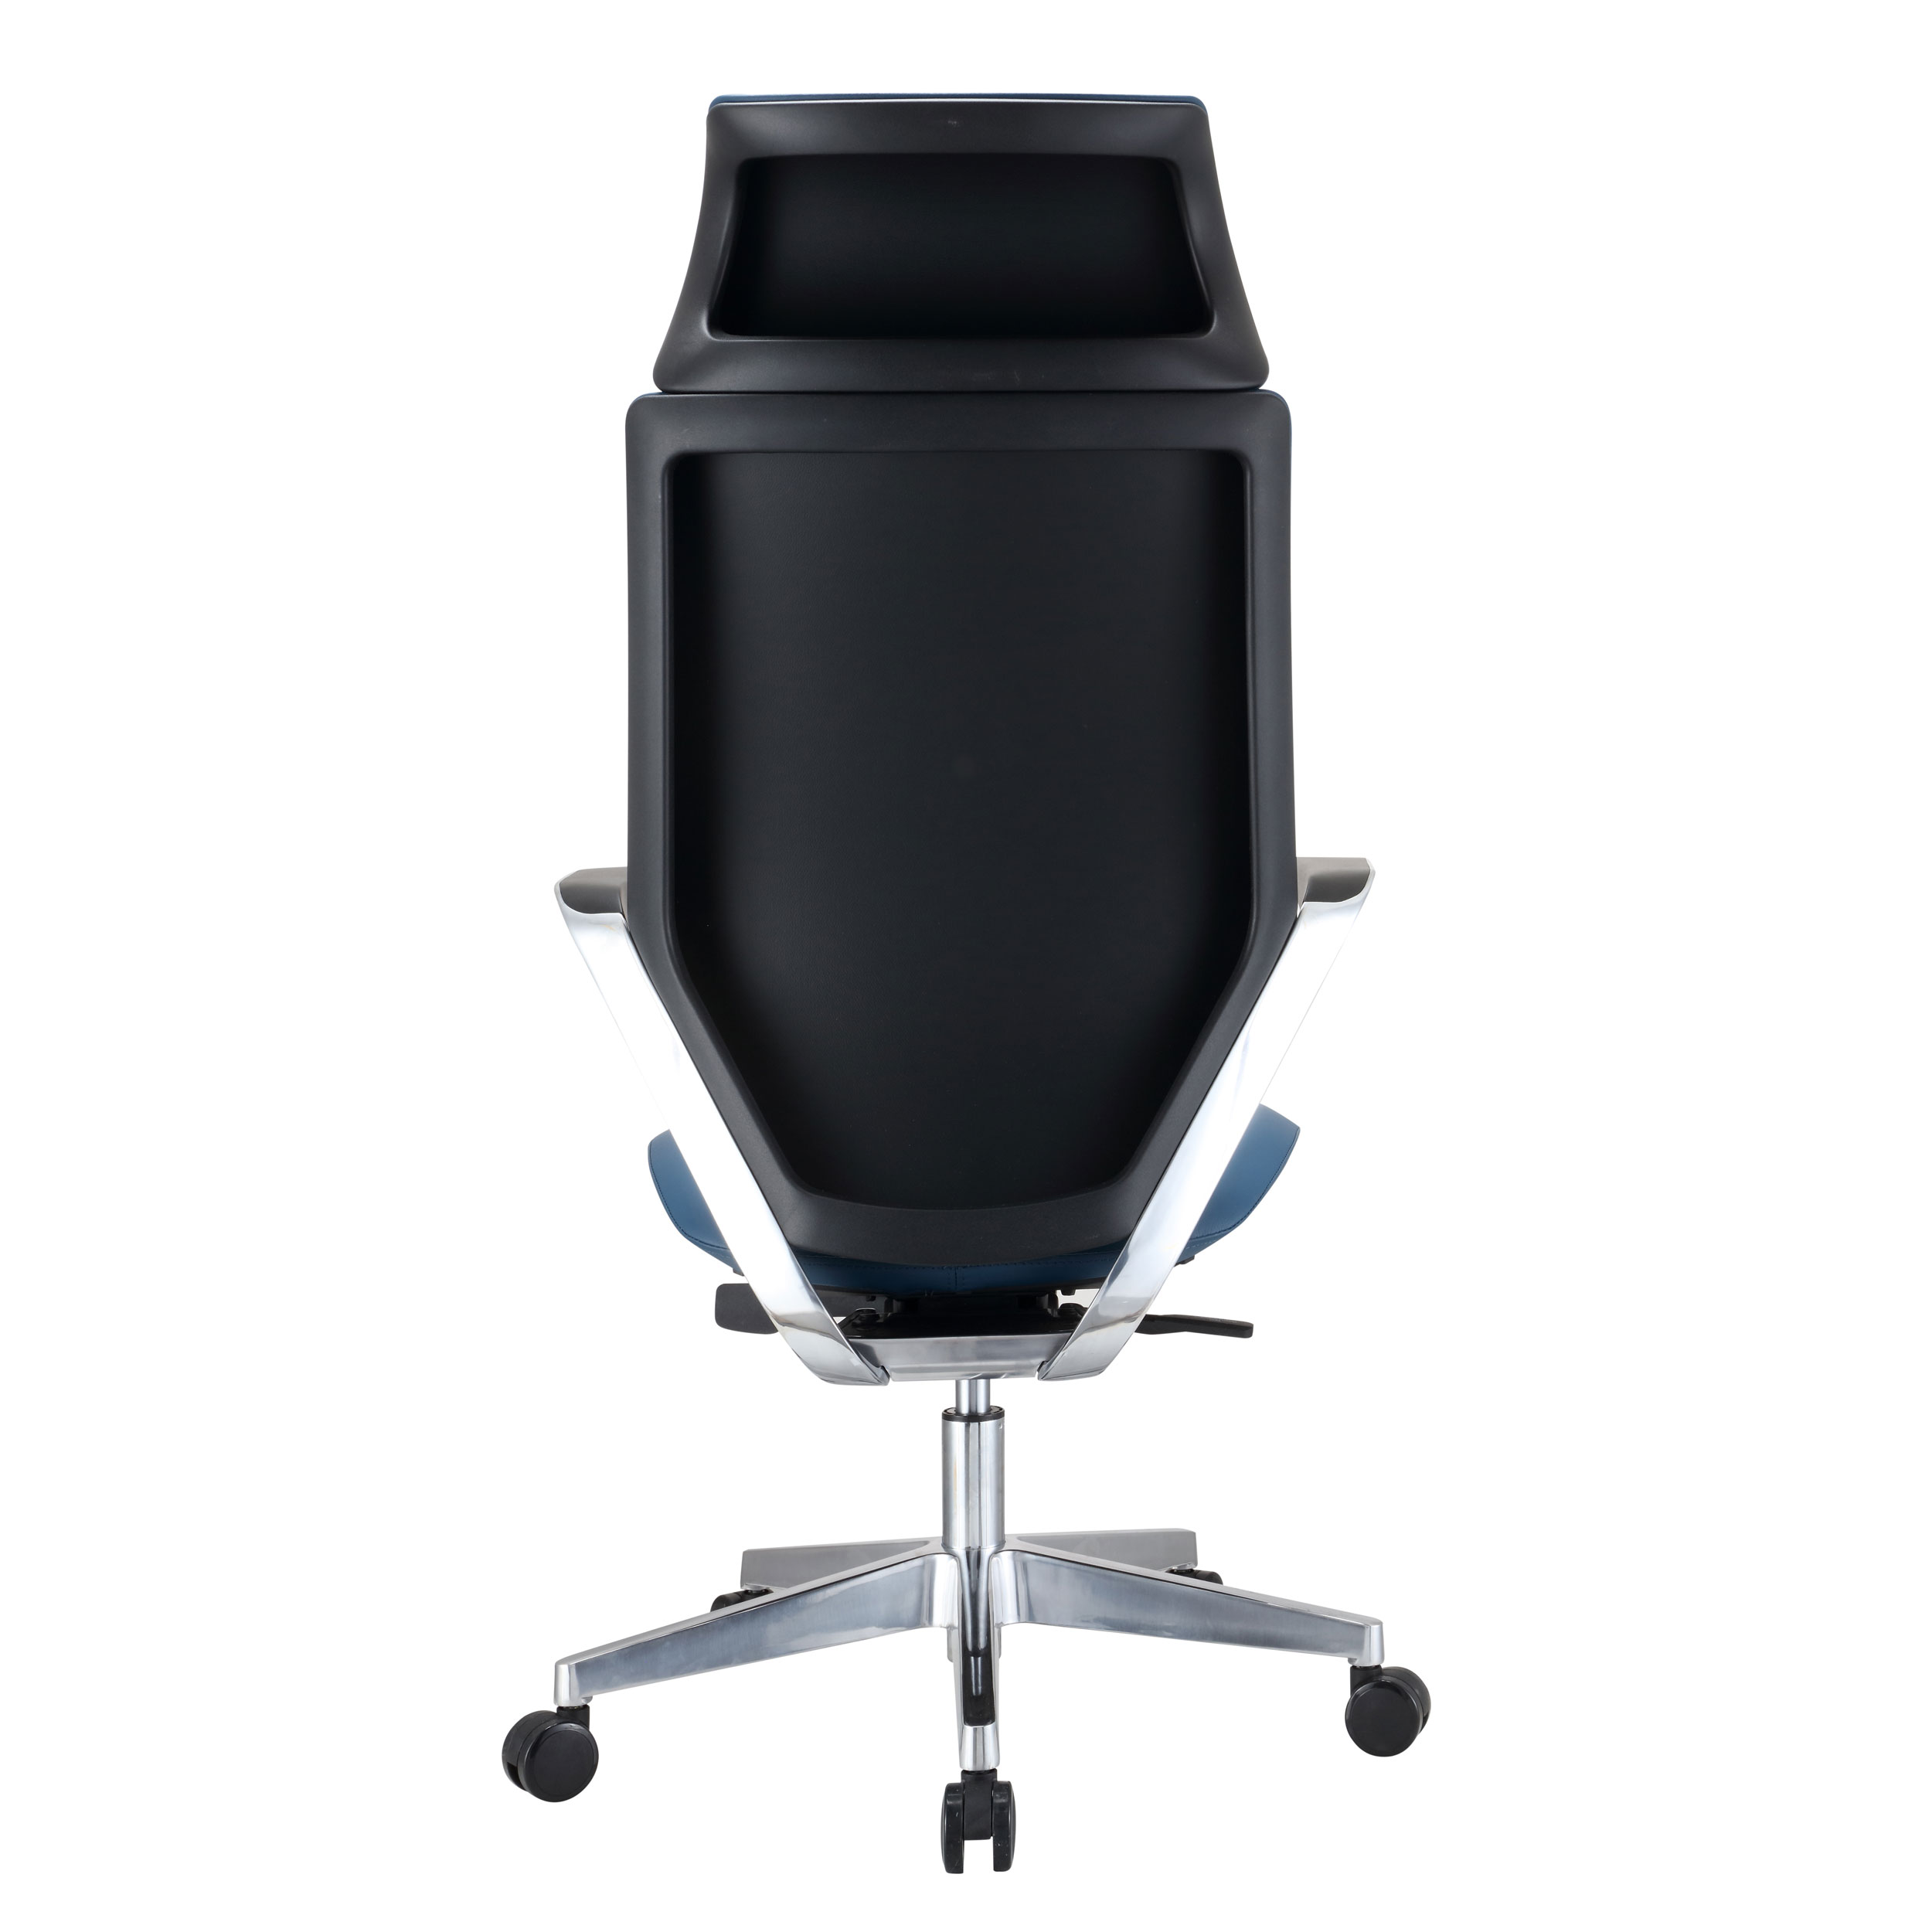 Back Profile of Executive High back Desk chair